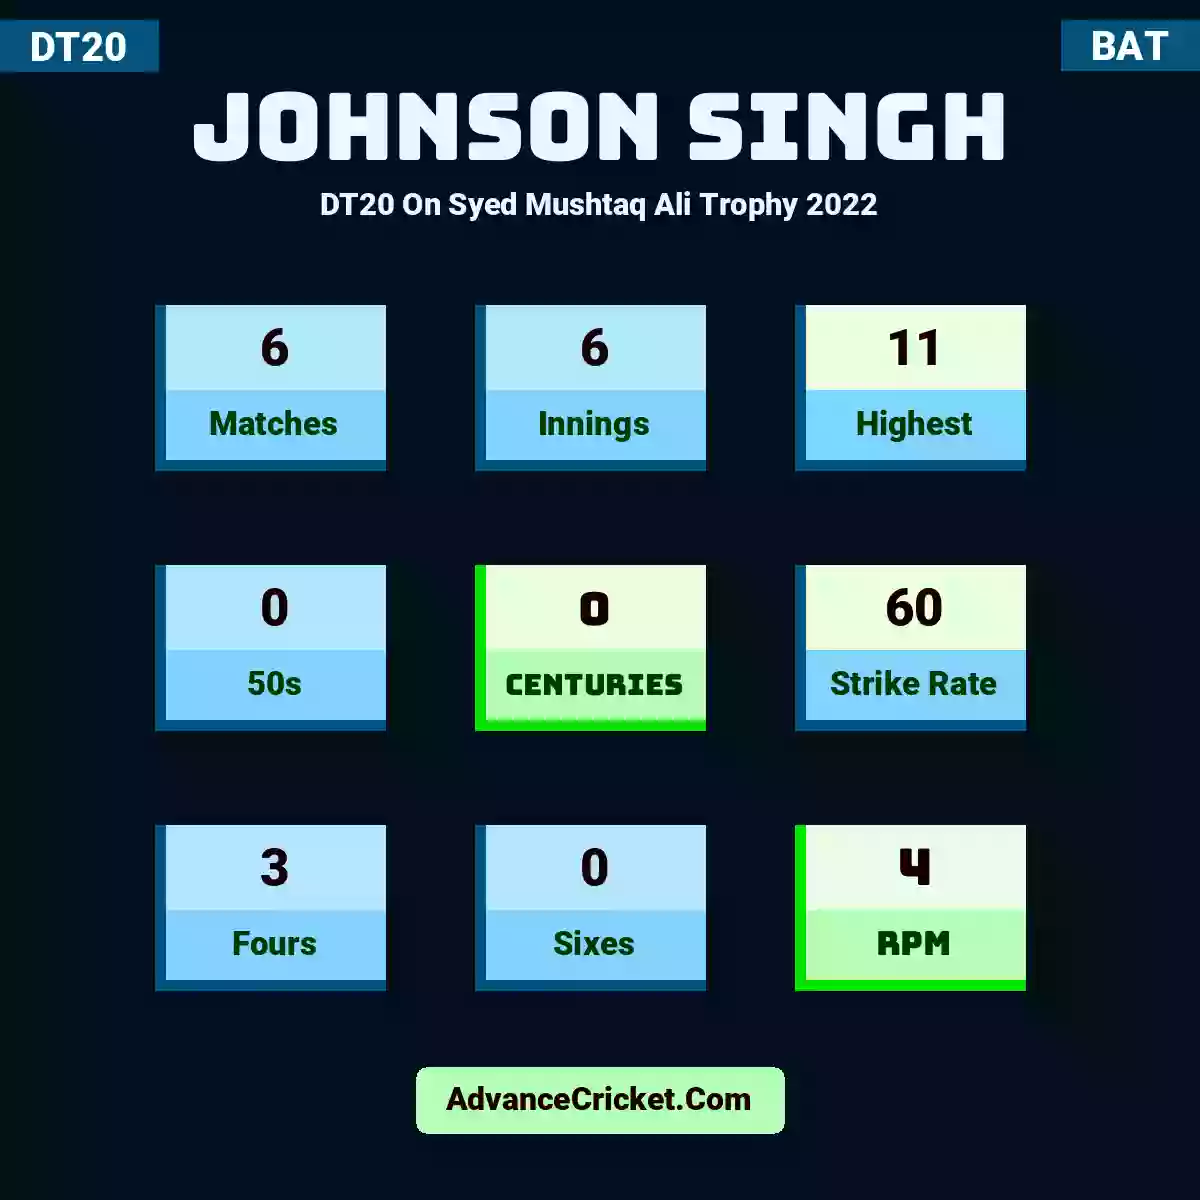 Johnson Singh DT20  On Syed Mushtaq Ali Trophy 2022, Johnson Singh played 6 matches, scored 11 runs as highest, 0 half-centuries, and 0 centuries, with a strike rate of 60. J.Singh hit 3 fours and 0 sixes, with an RPM of 4.